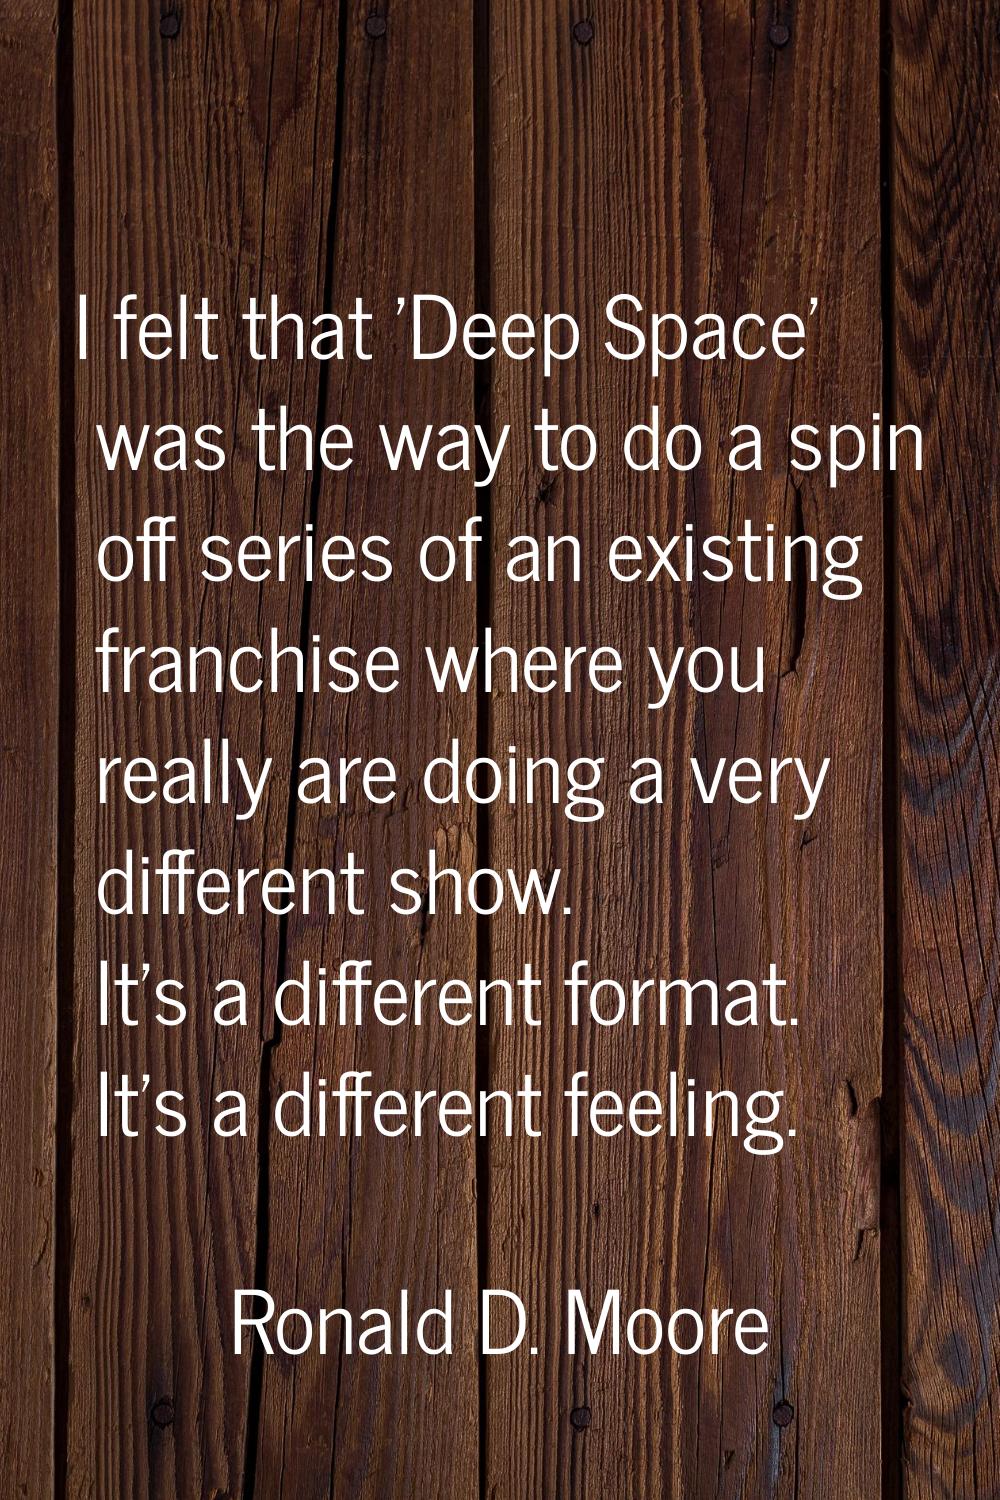 I felt that 'Deep Space' was the way to do a spin off series of an existing franchise where you rea